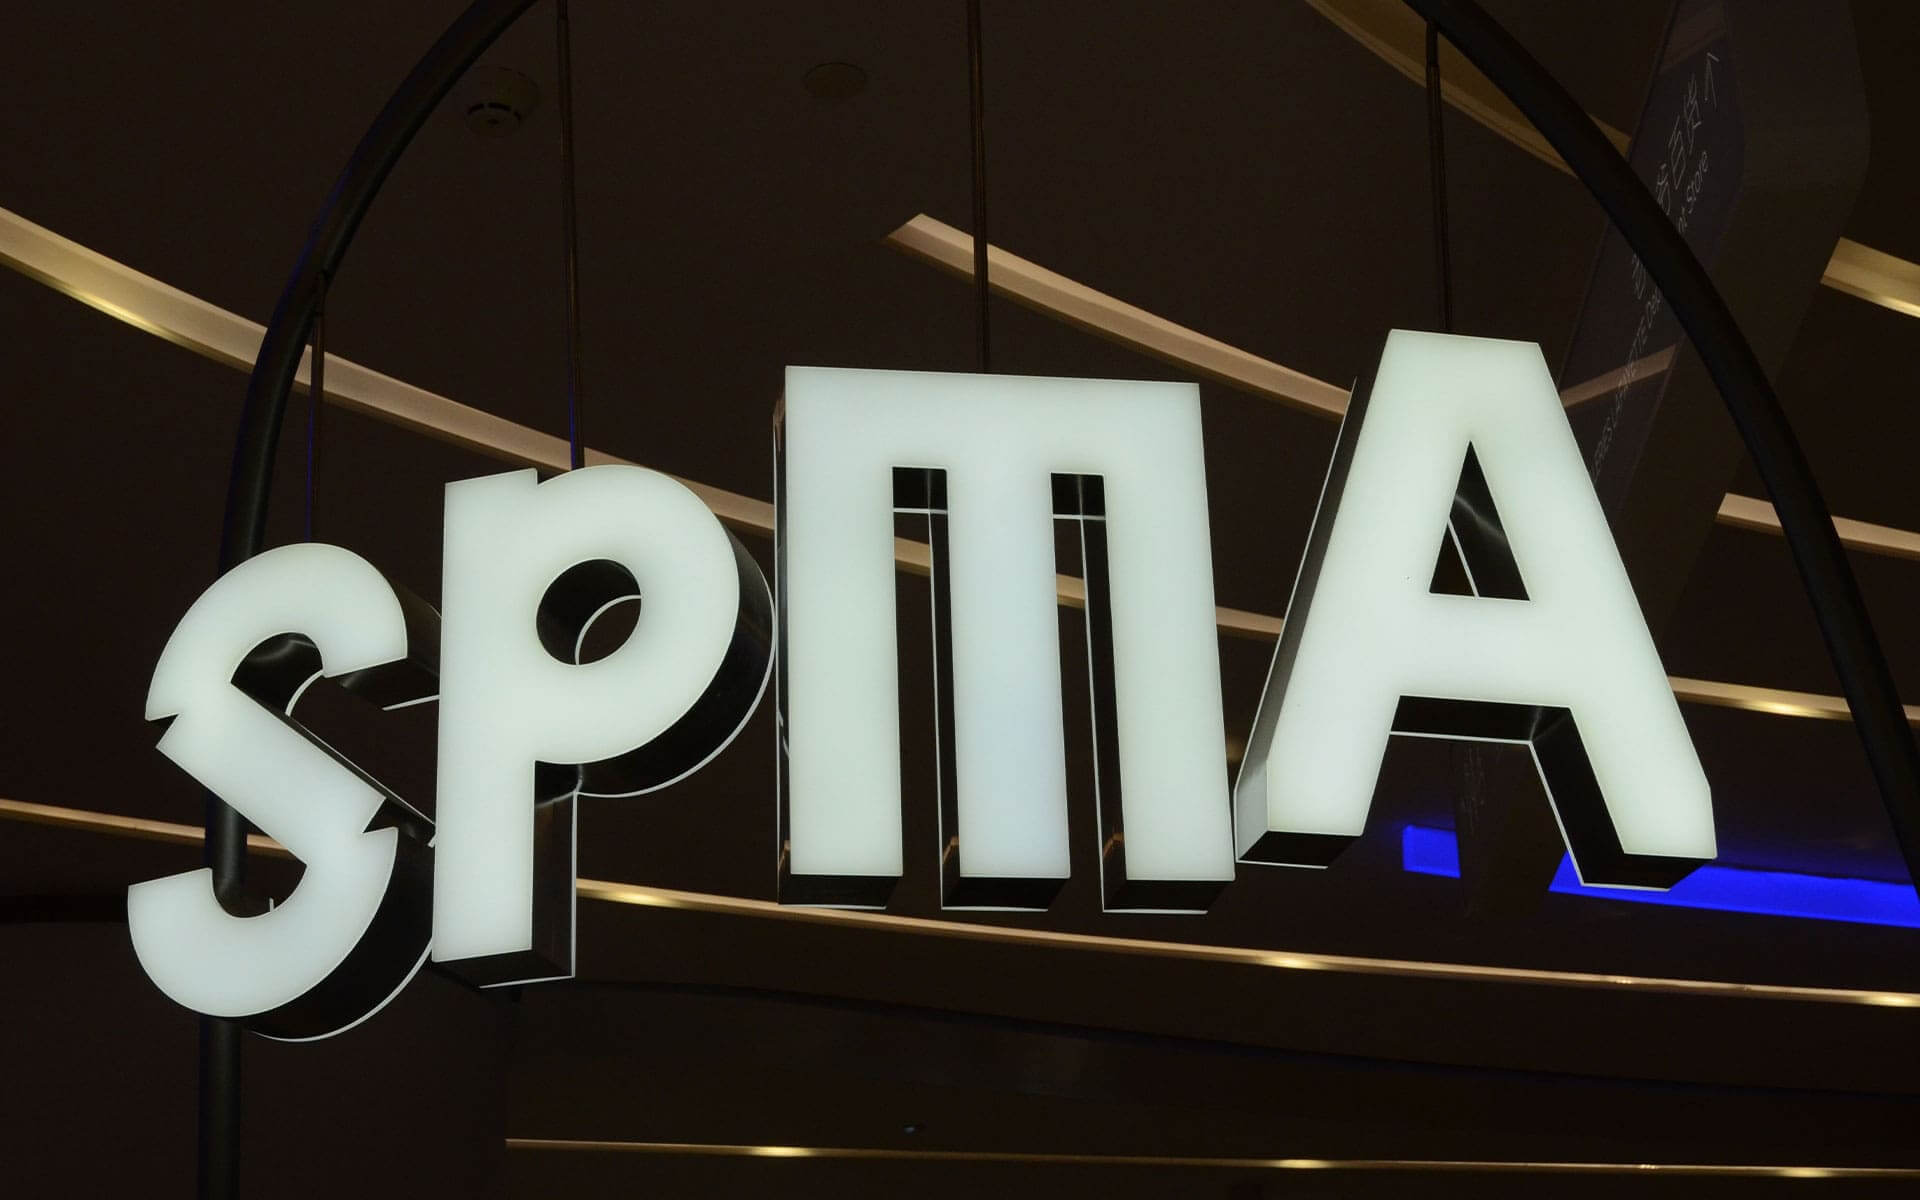 Face and Back-lit Metal Channel Letters for Smpa